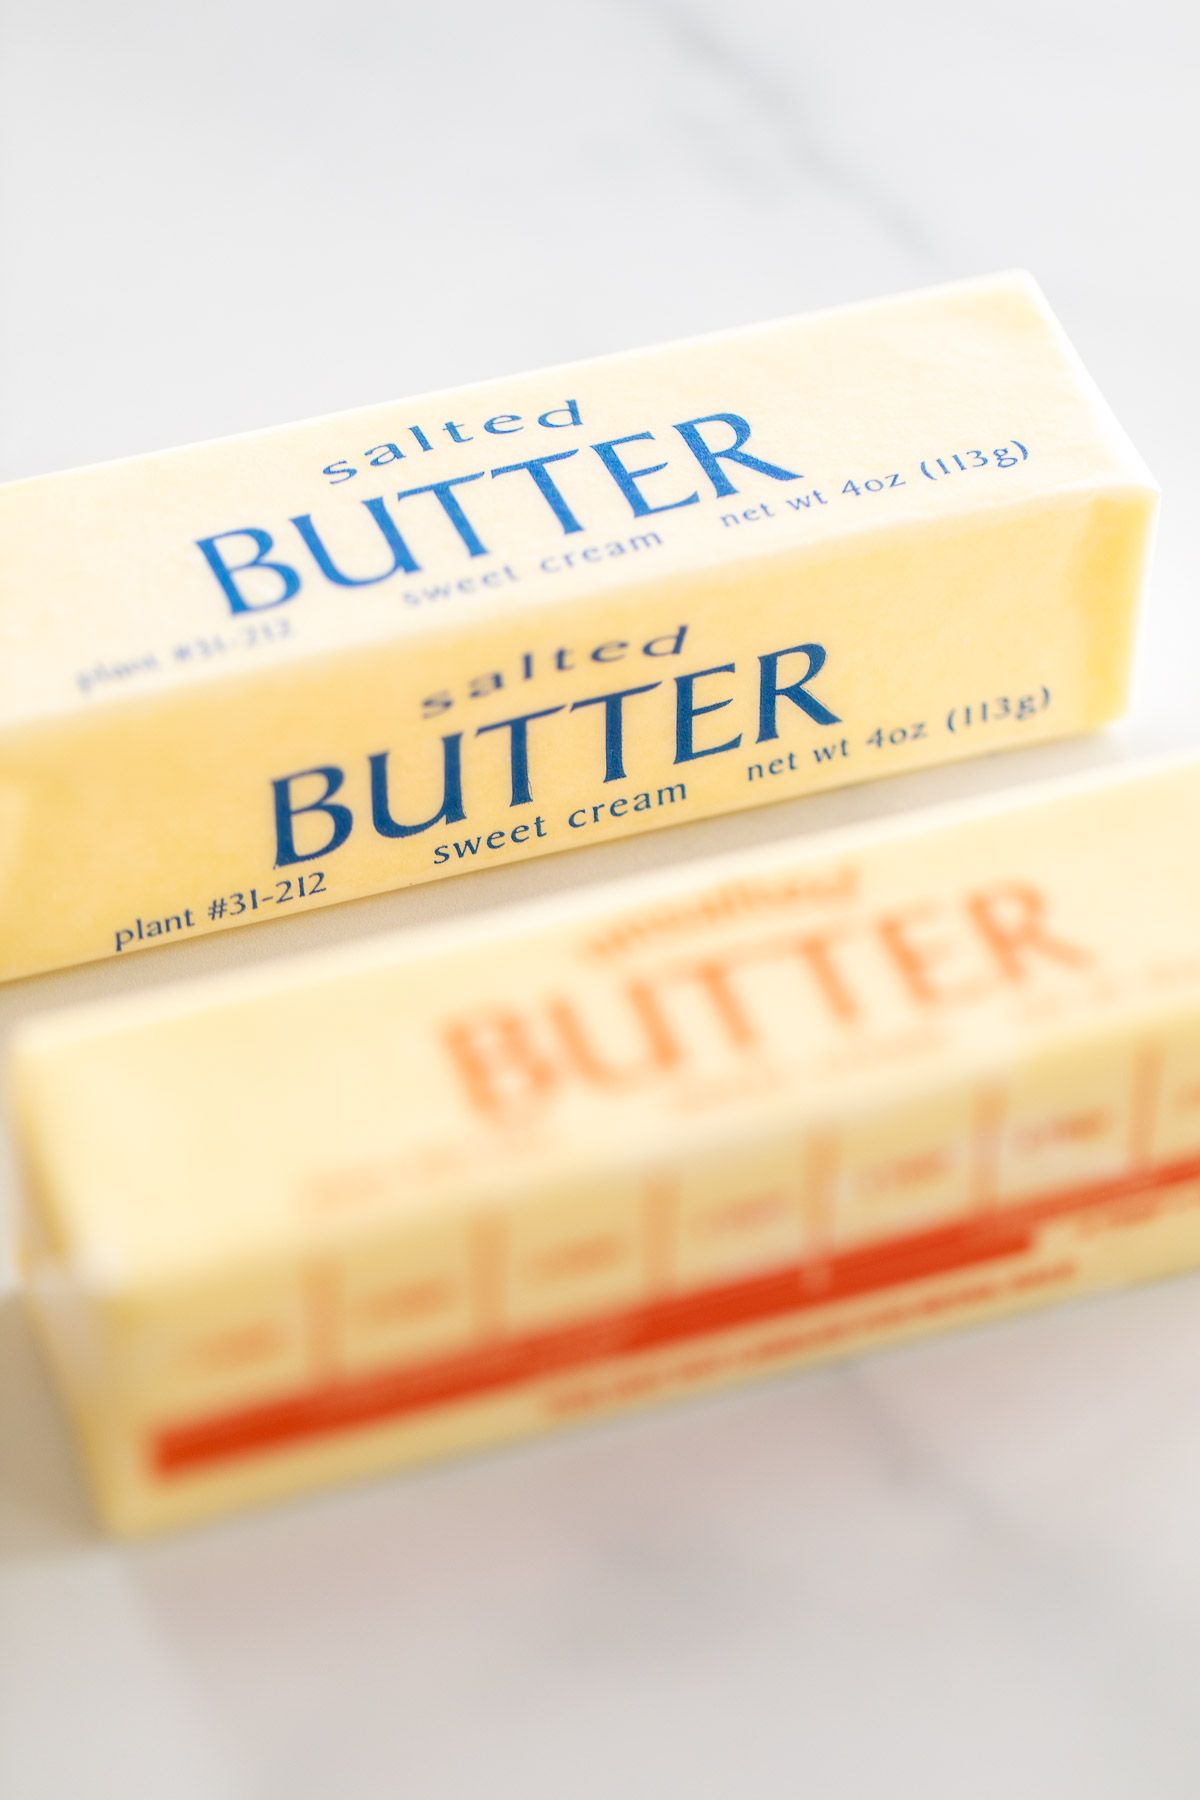 A stick of unsalted butter next to a stick of salted butter on a marble surface.